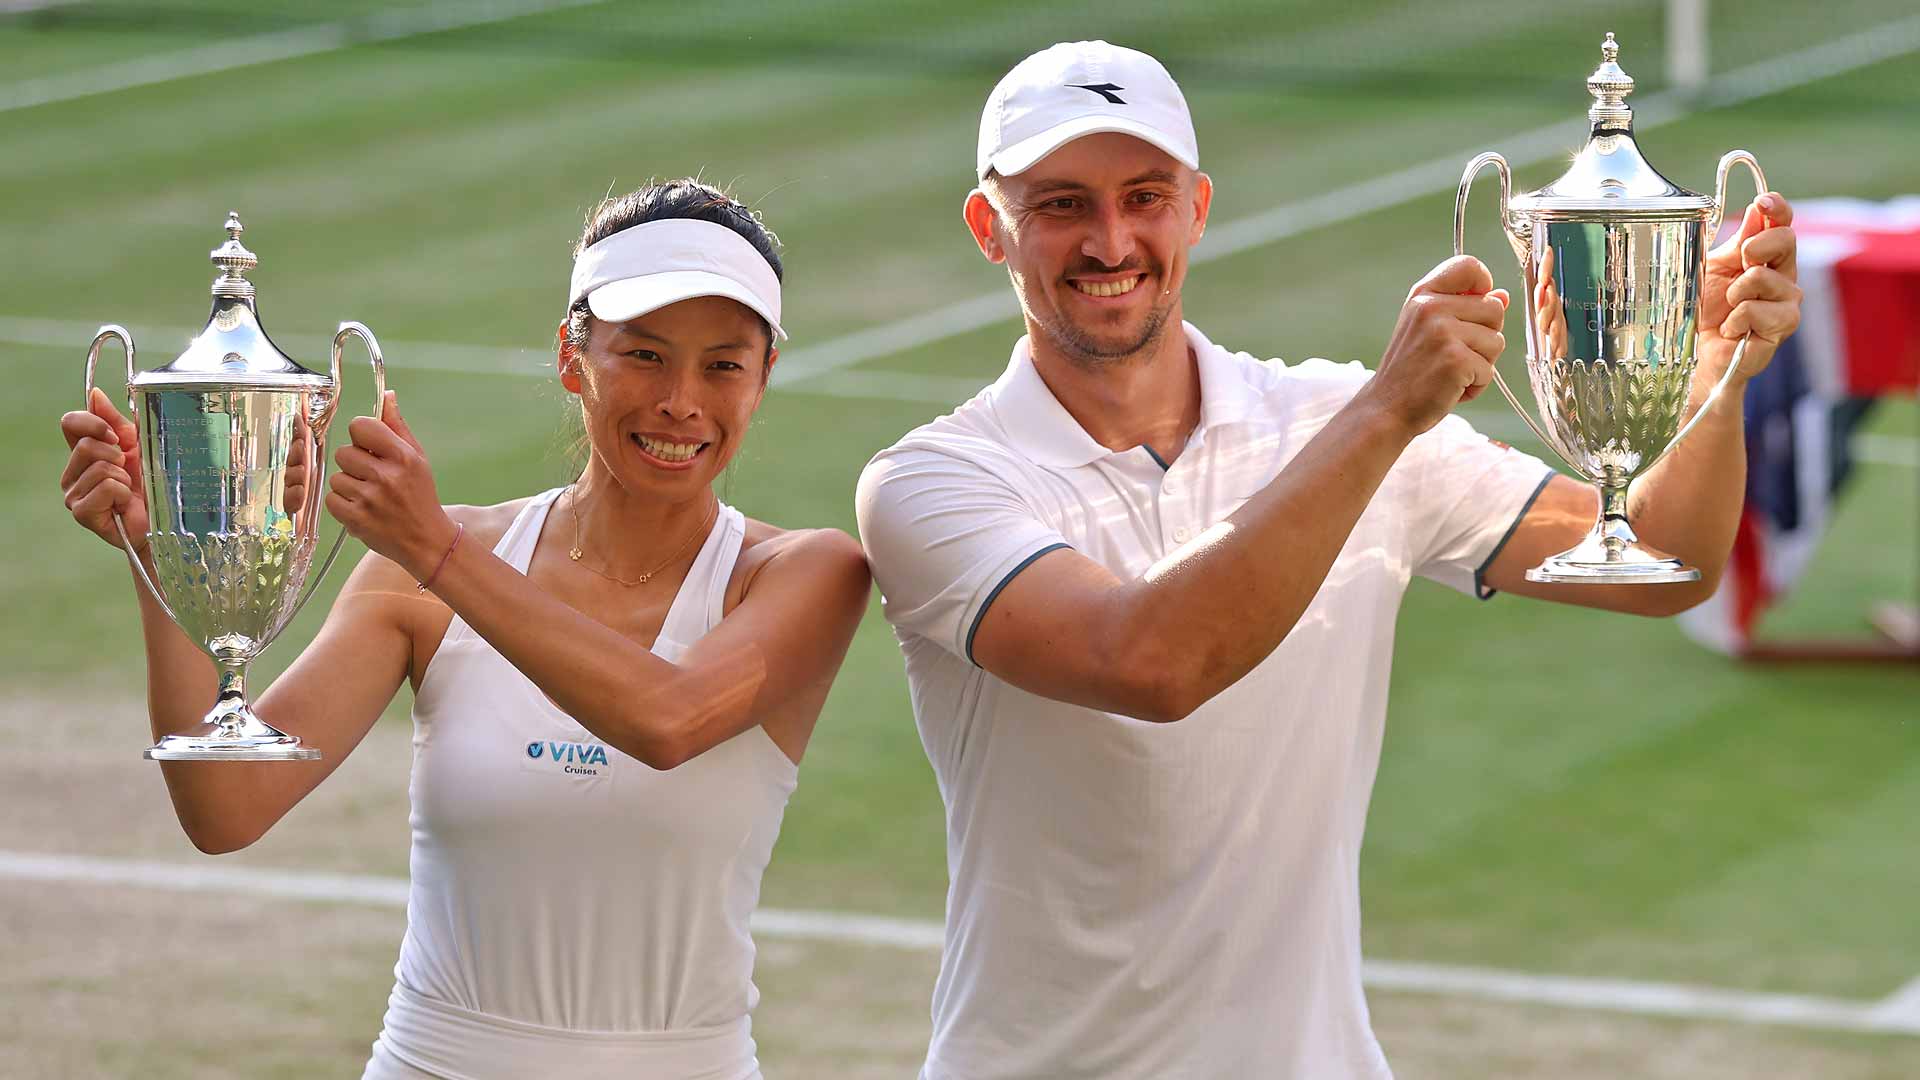 Hsieh Su-Wei and Jan Zielinski defeat Santiago Gonzalez and Giuliana Olmos in straight sets on Sunday to triumph at Wimbledon.